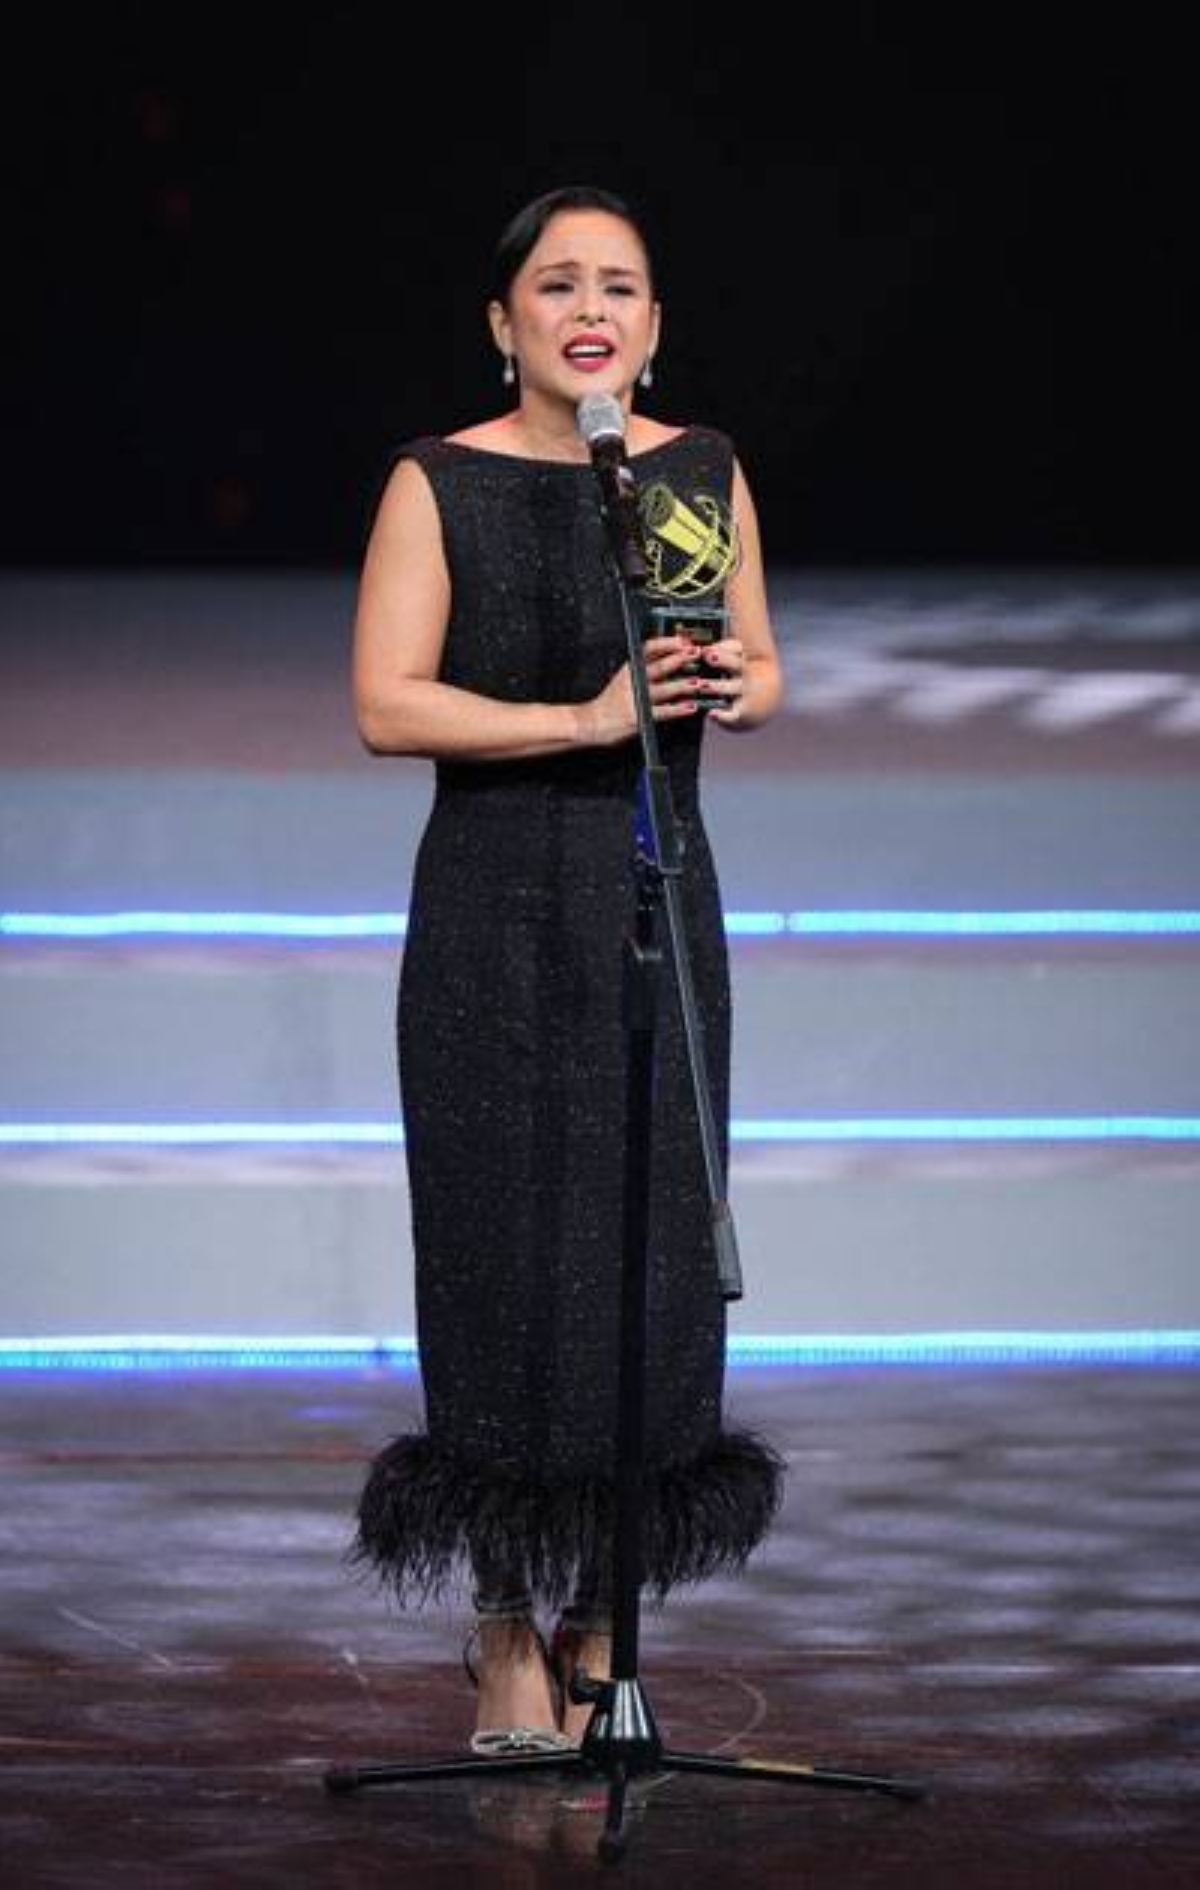 philippine cinema shines anew at the 6th eddys